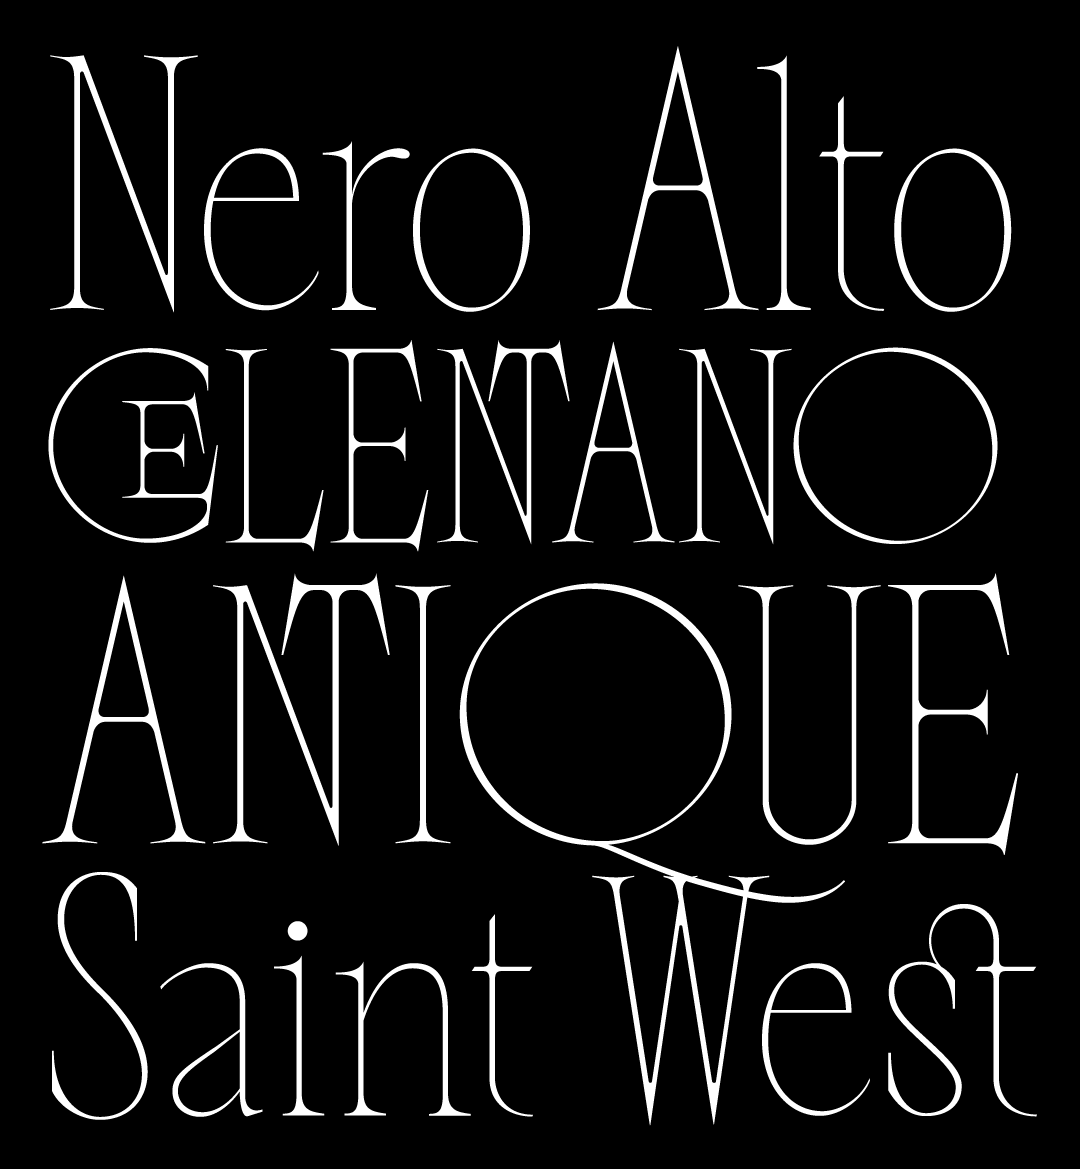 Nero_alto_typeverything-01.png.9fd278b94be6e2d2c548fa144ed8363a.png